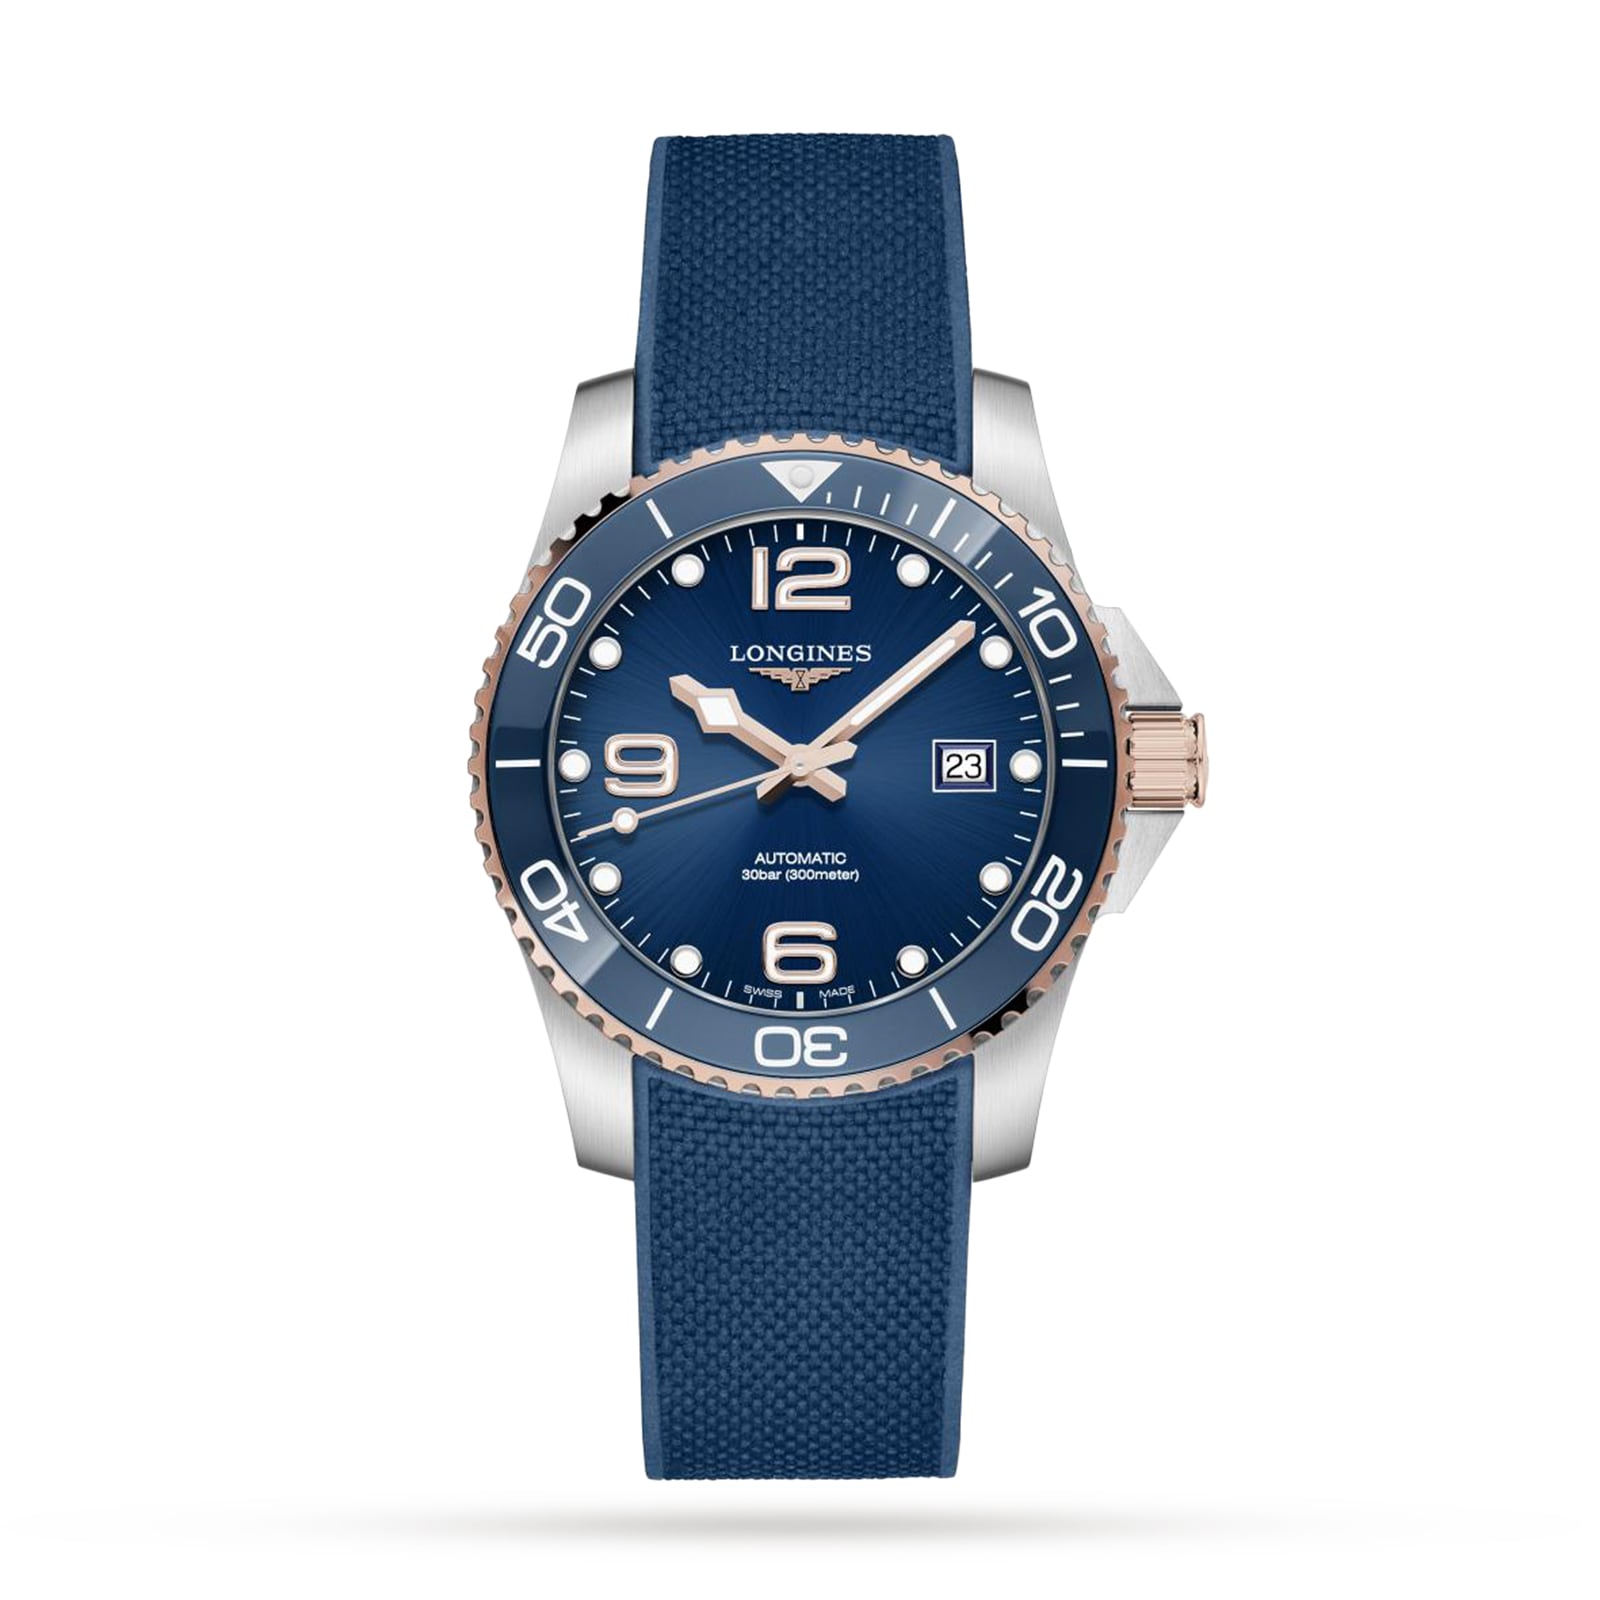 HydroConquest 41mm Mens Watch - Blue | Reserve & Collect